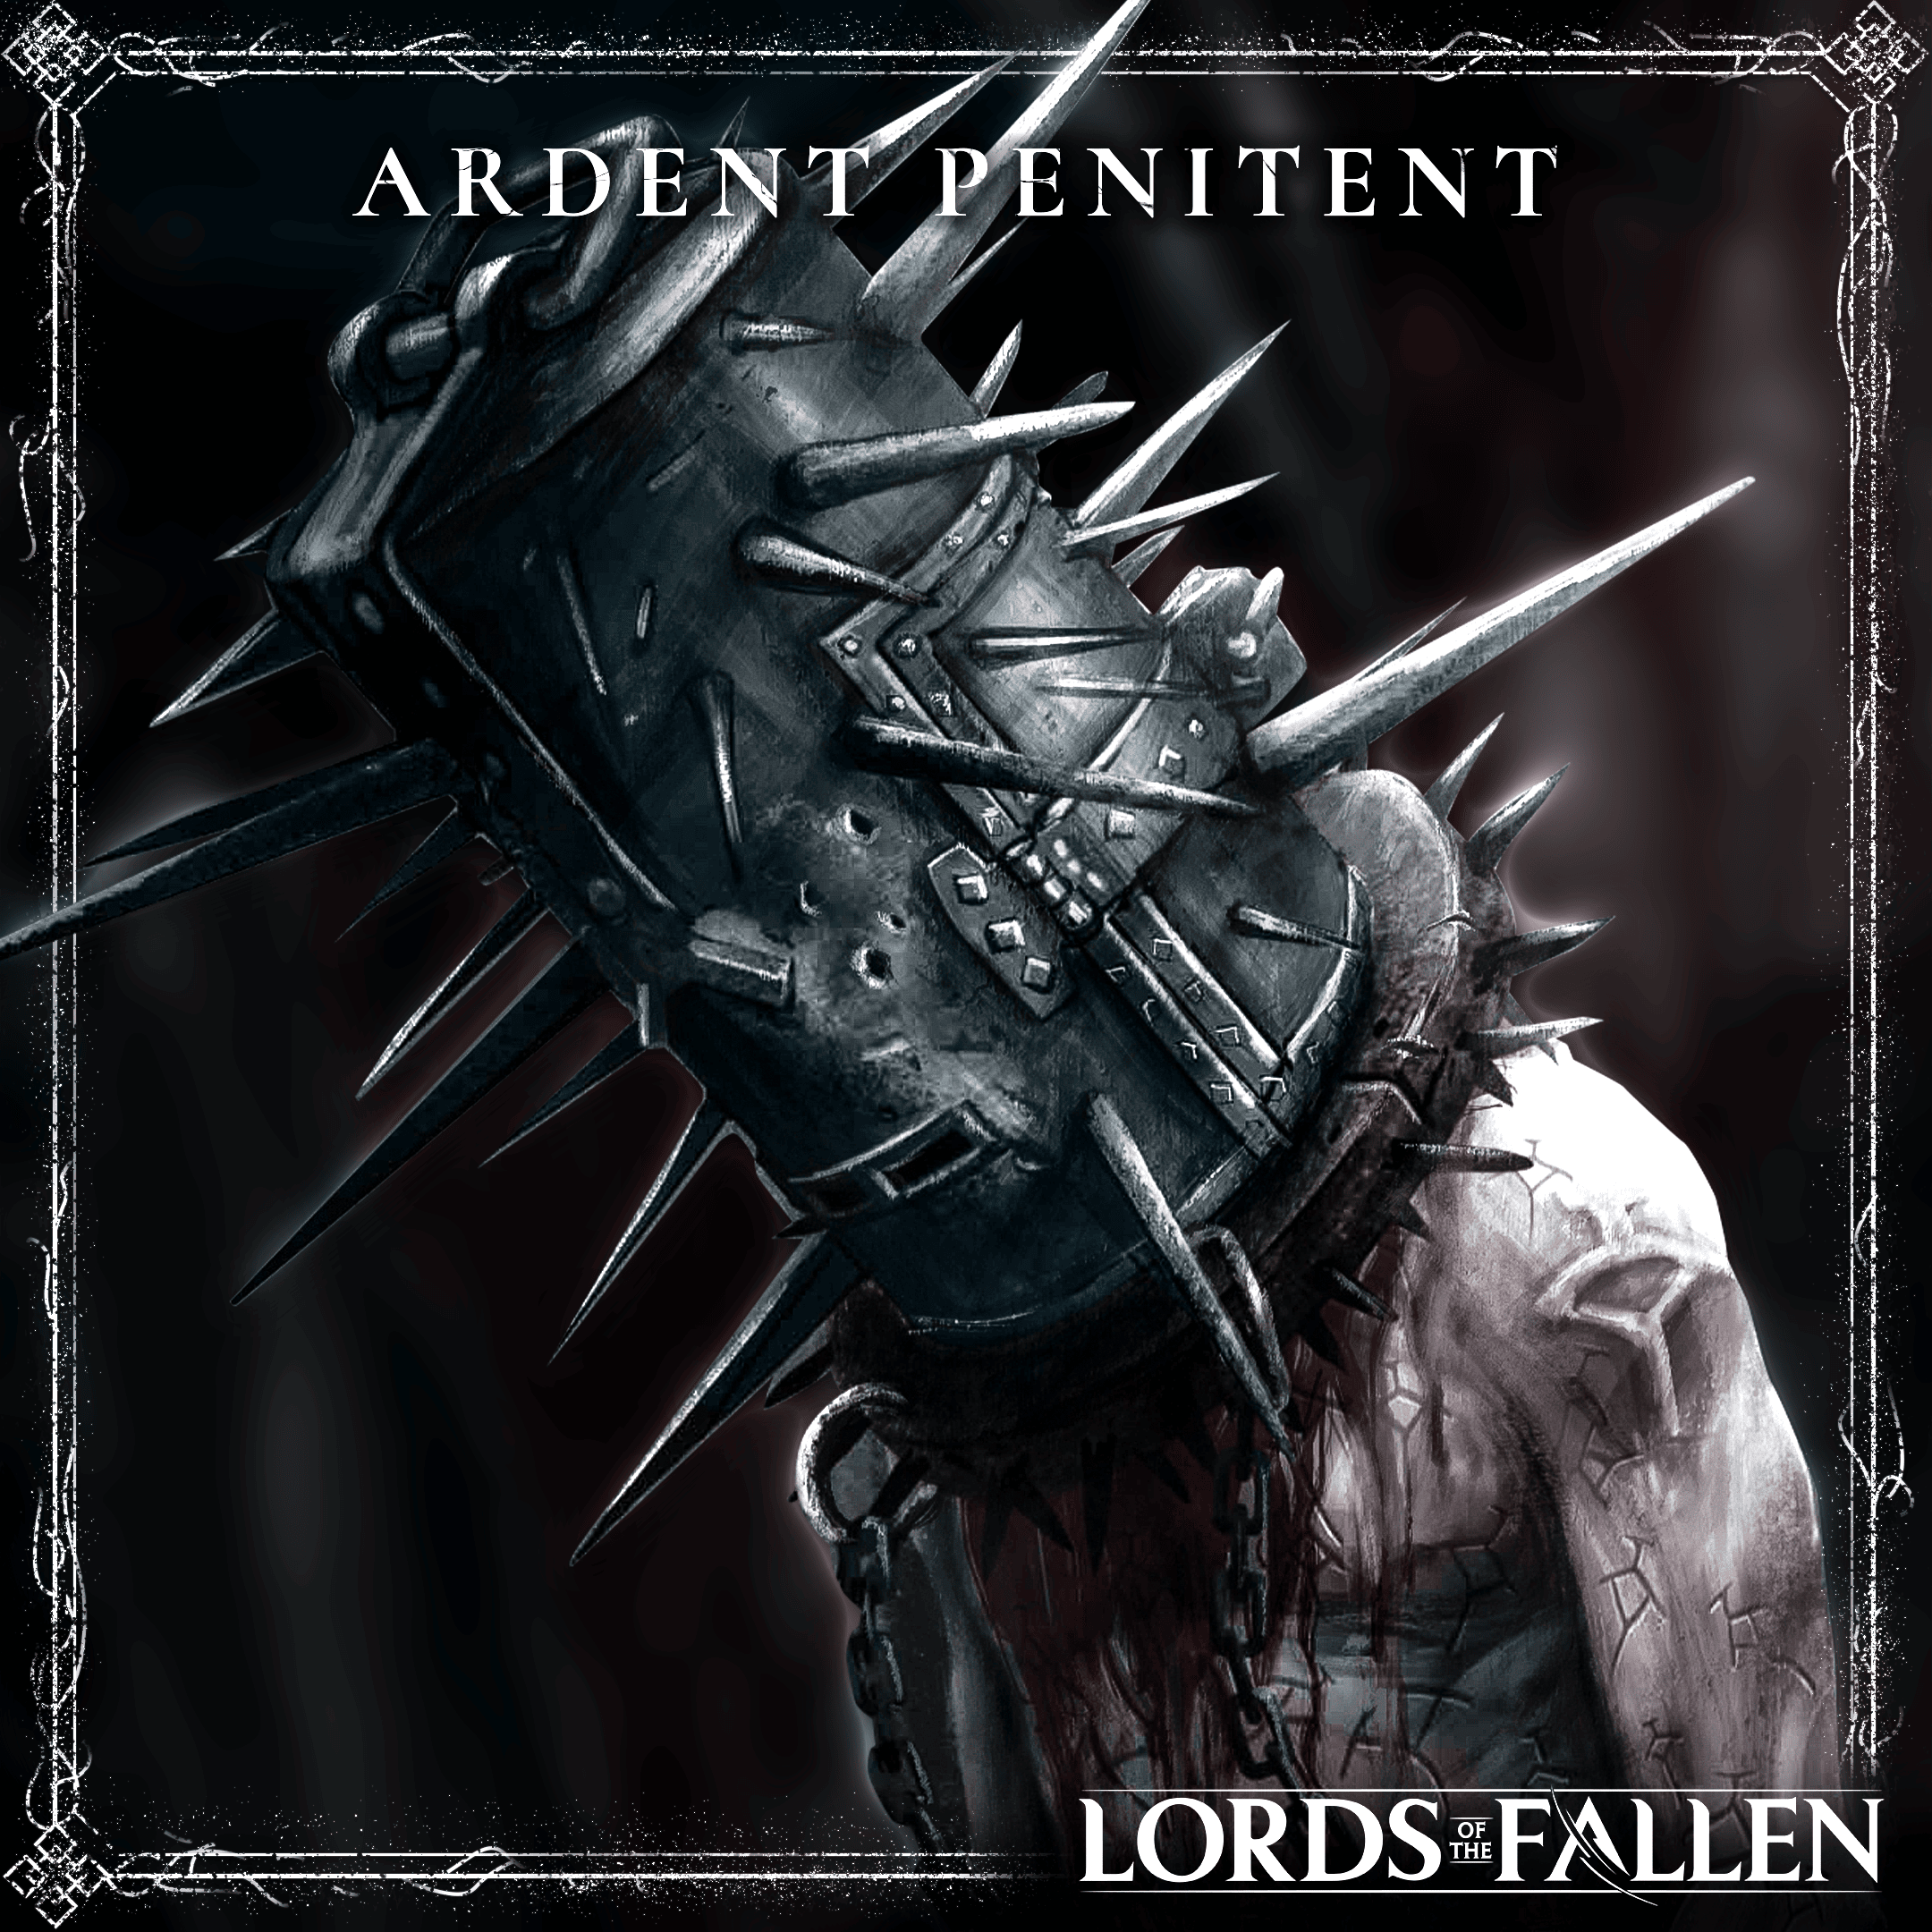 lords of the fallen ardent penitent